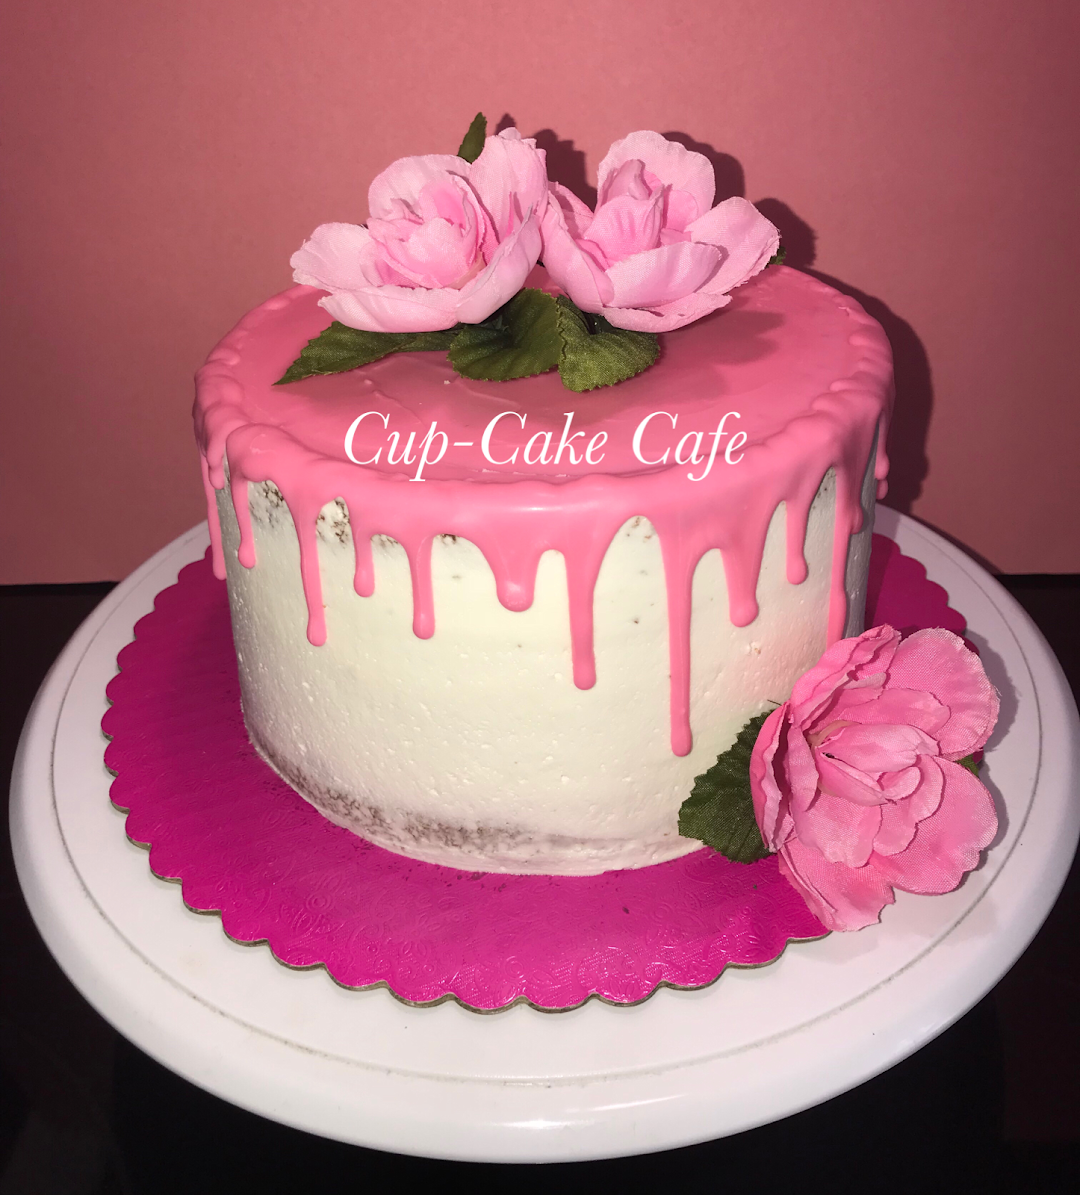 Cup-Cake Cafe